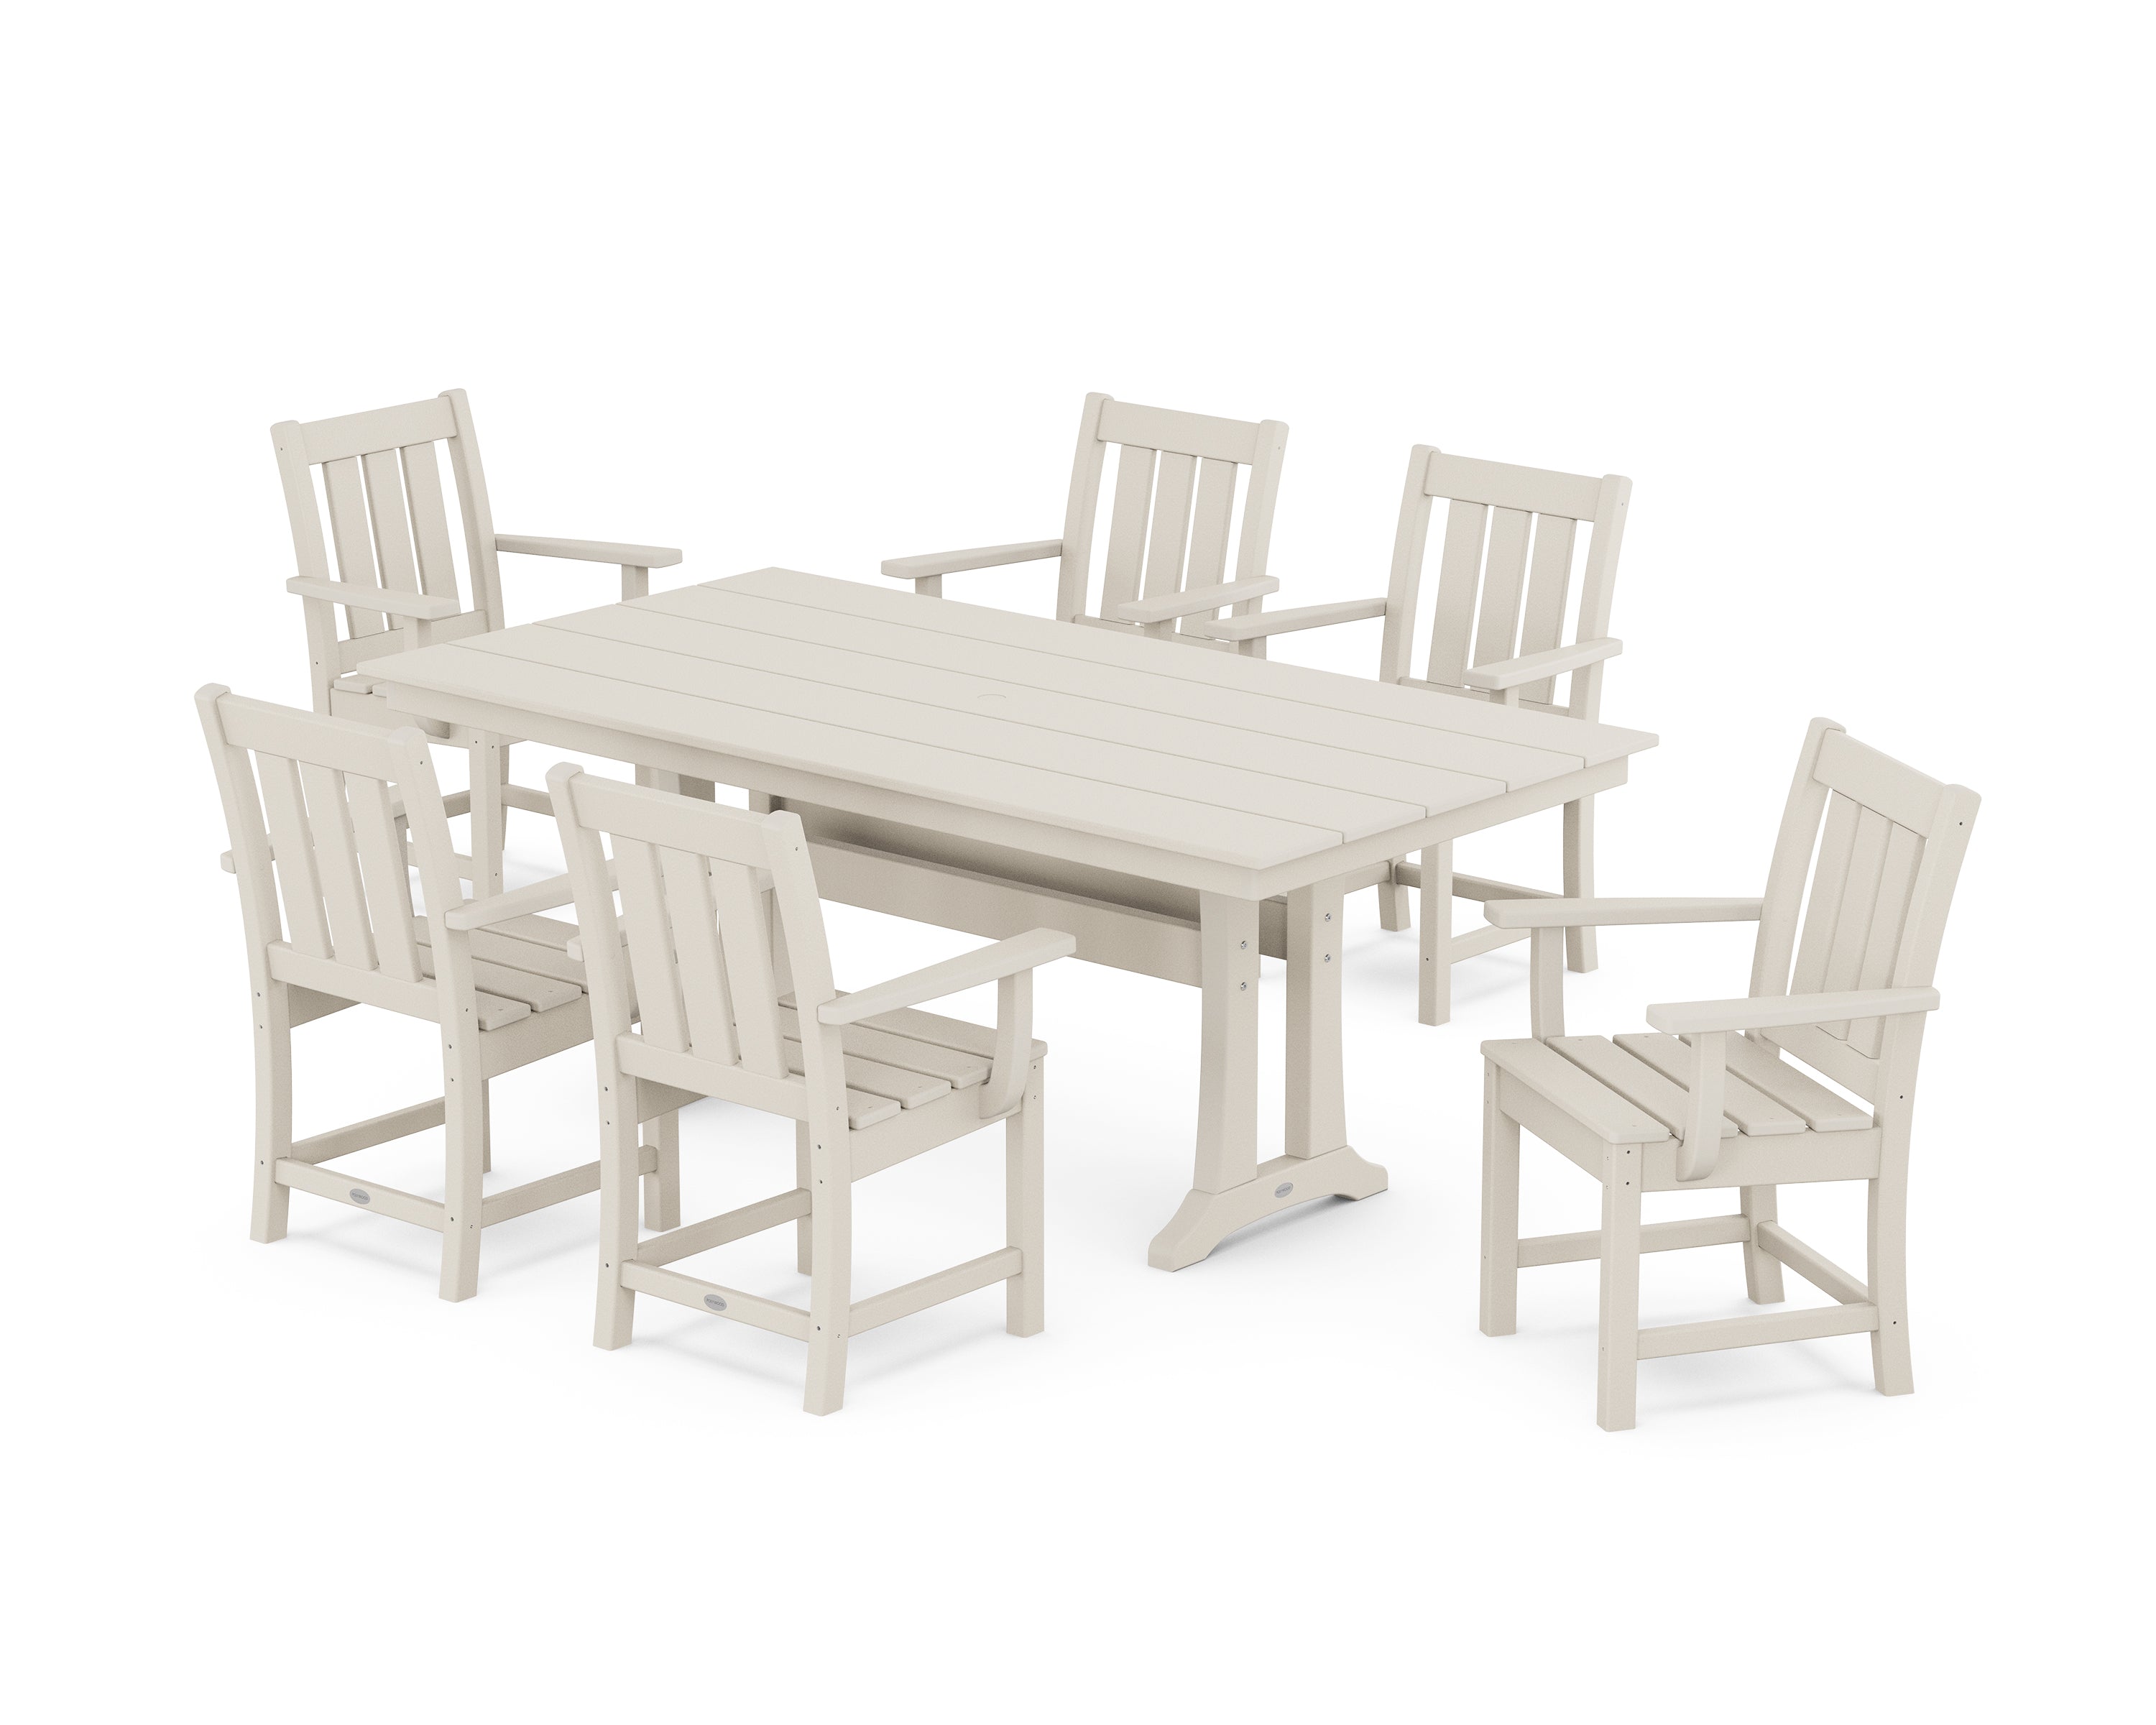 POLYWOOD® Oxford Arm Chair 7-Piece Farmhouse Dining Set with Trestle Legs in Sand